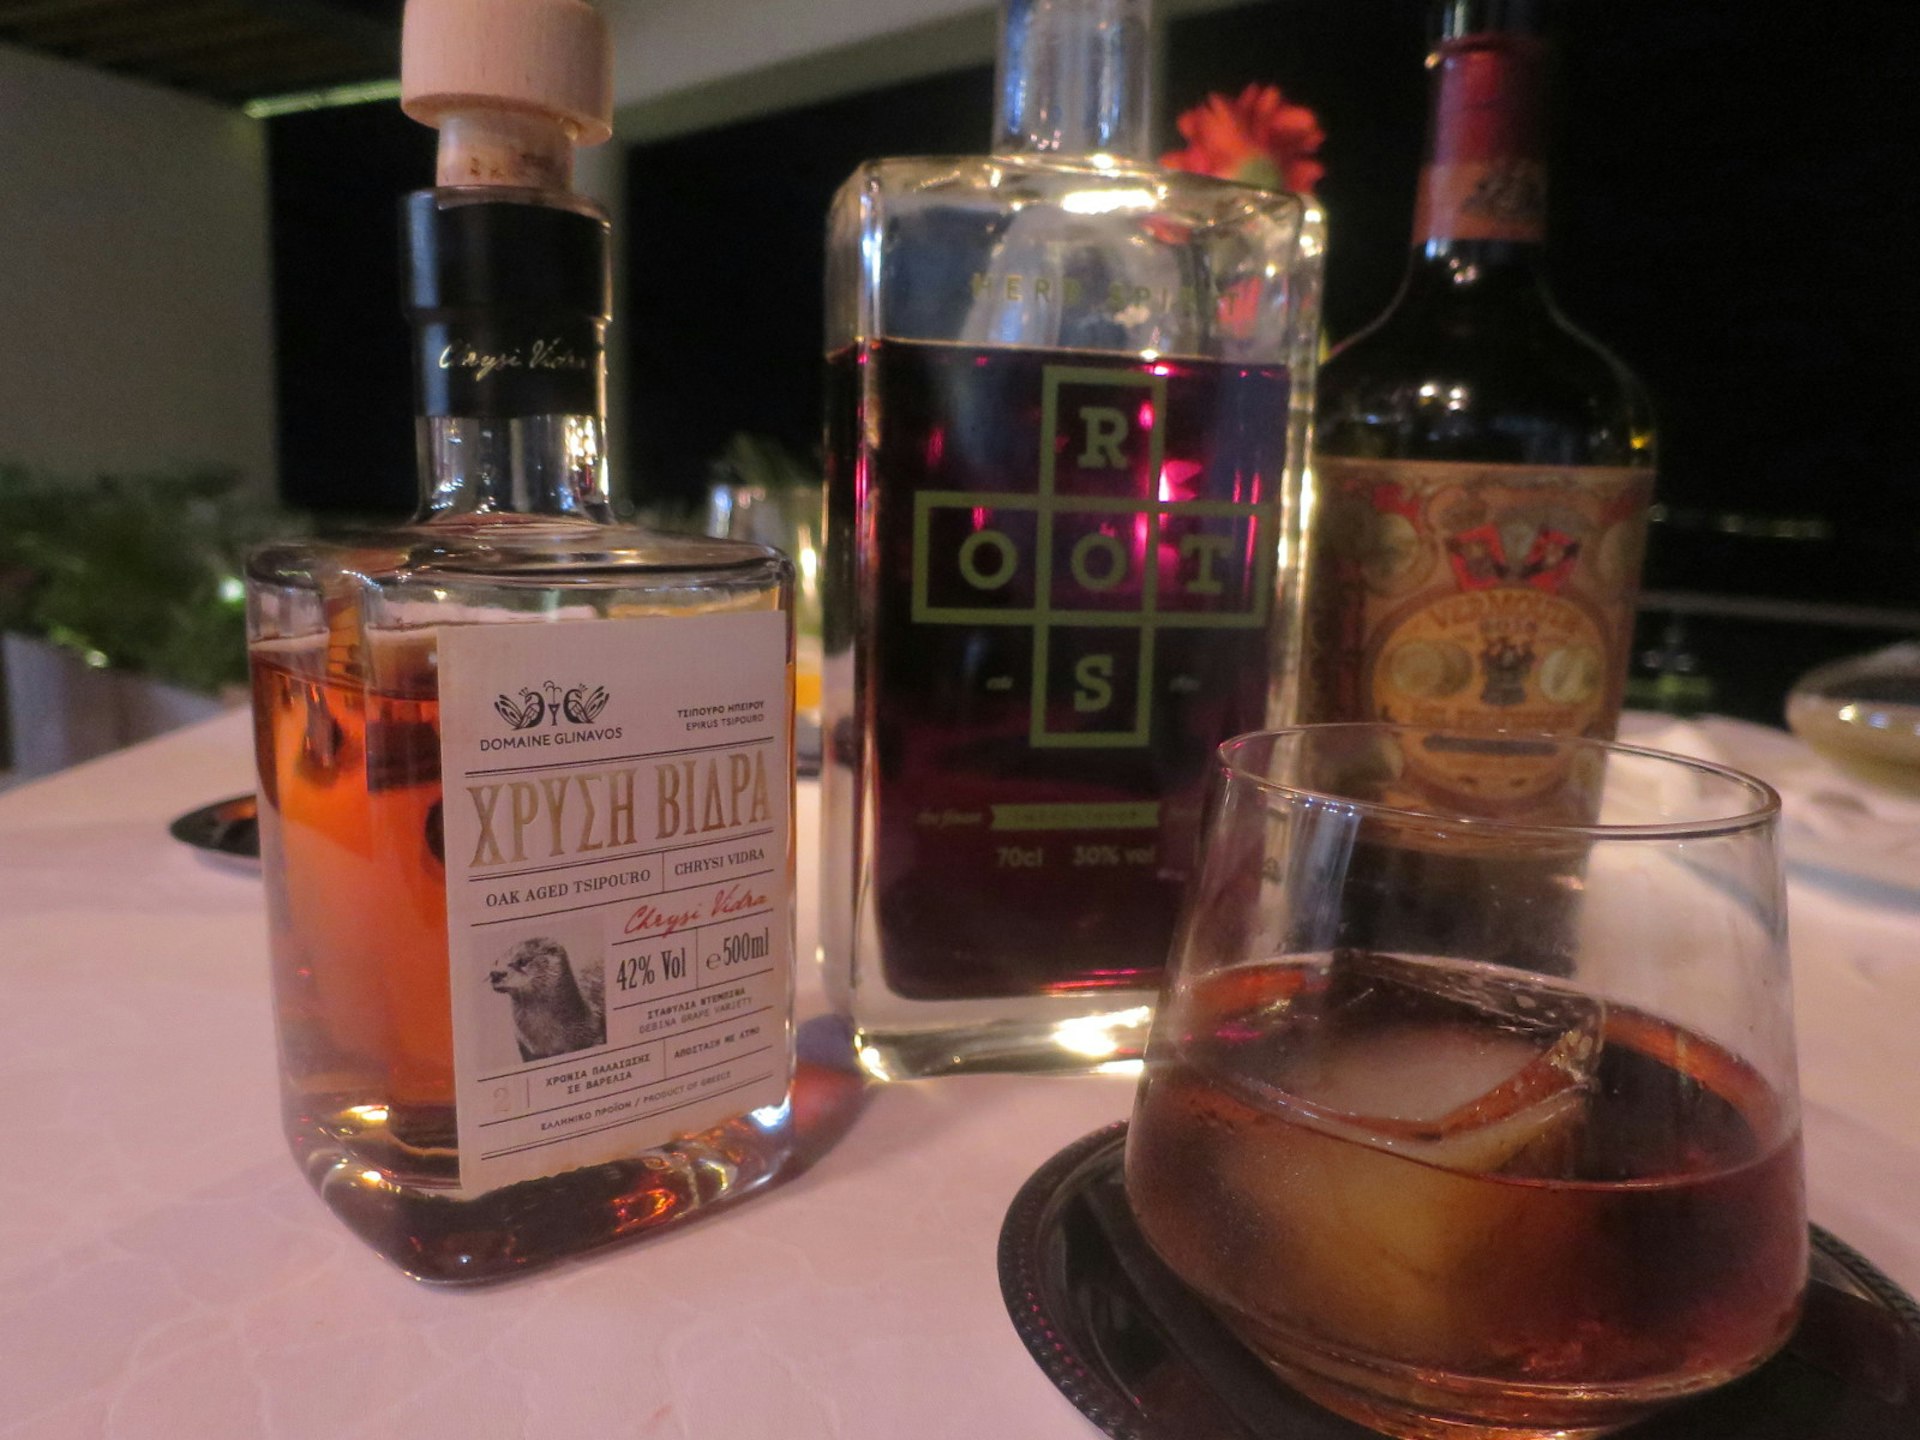 The Greek Old Fashioned is made with tsipouro aged in oak barrels for two years